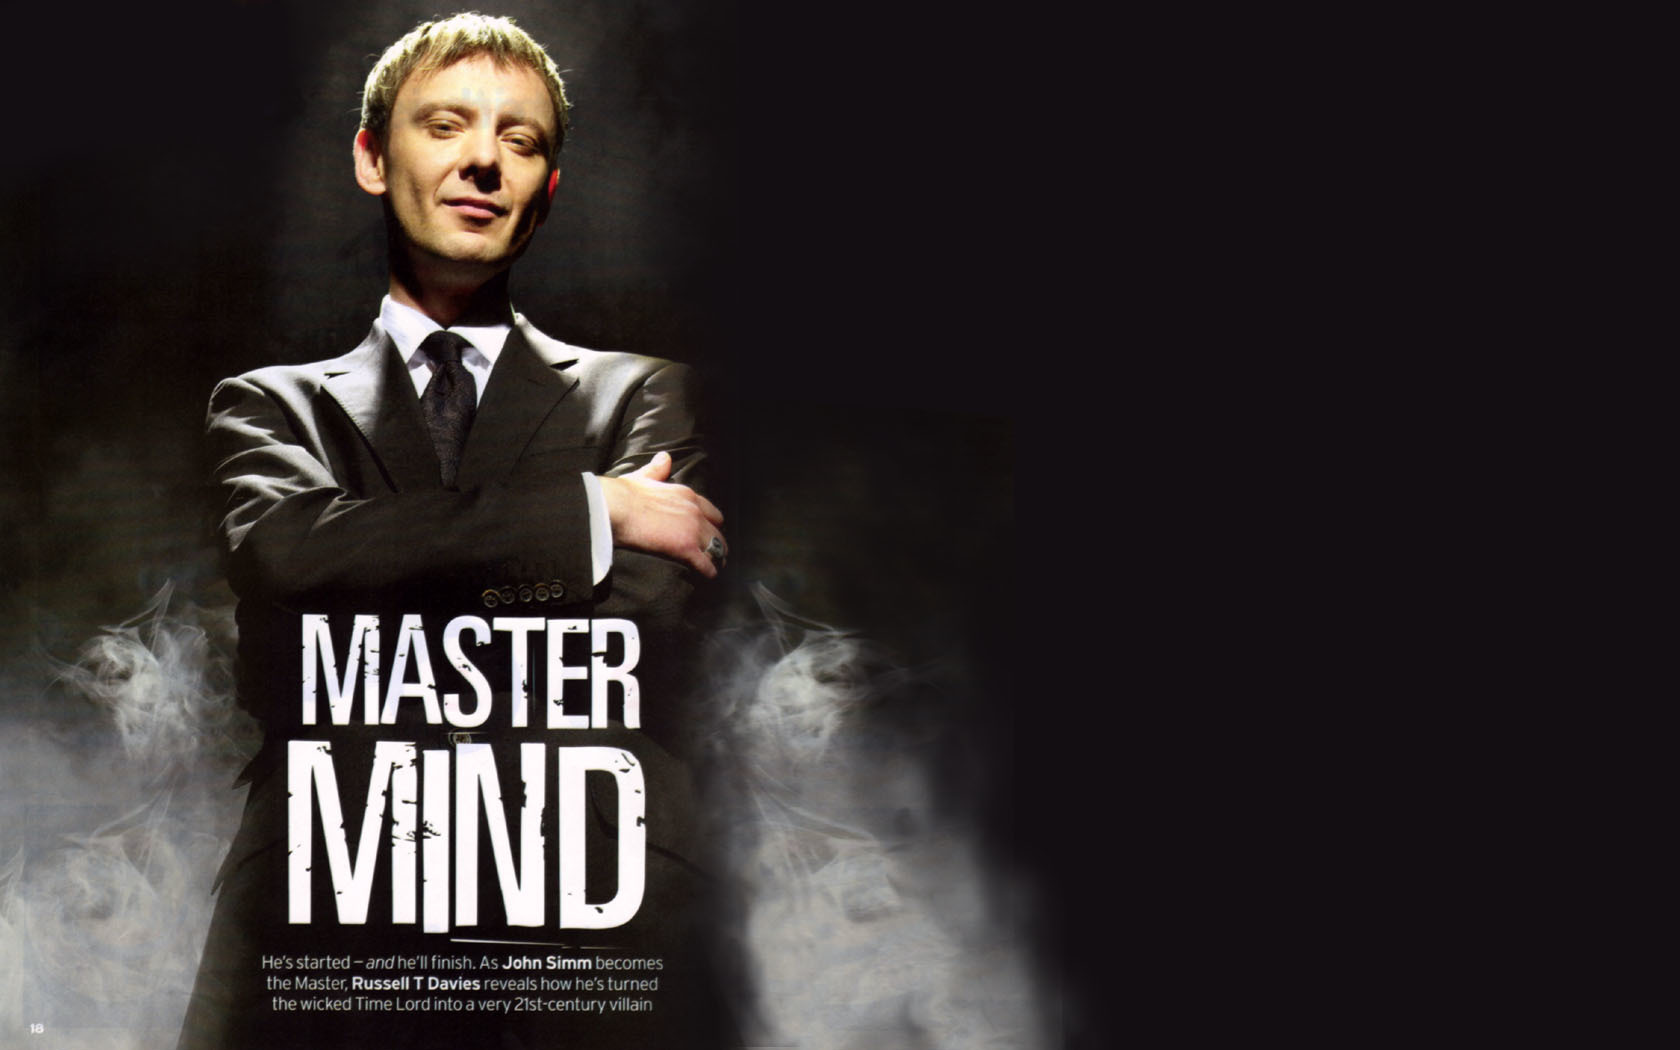 Doctor  Wallpaper on The Master Doctor Who John Simm Hd Wallpaper   Celebrity   Actress